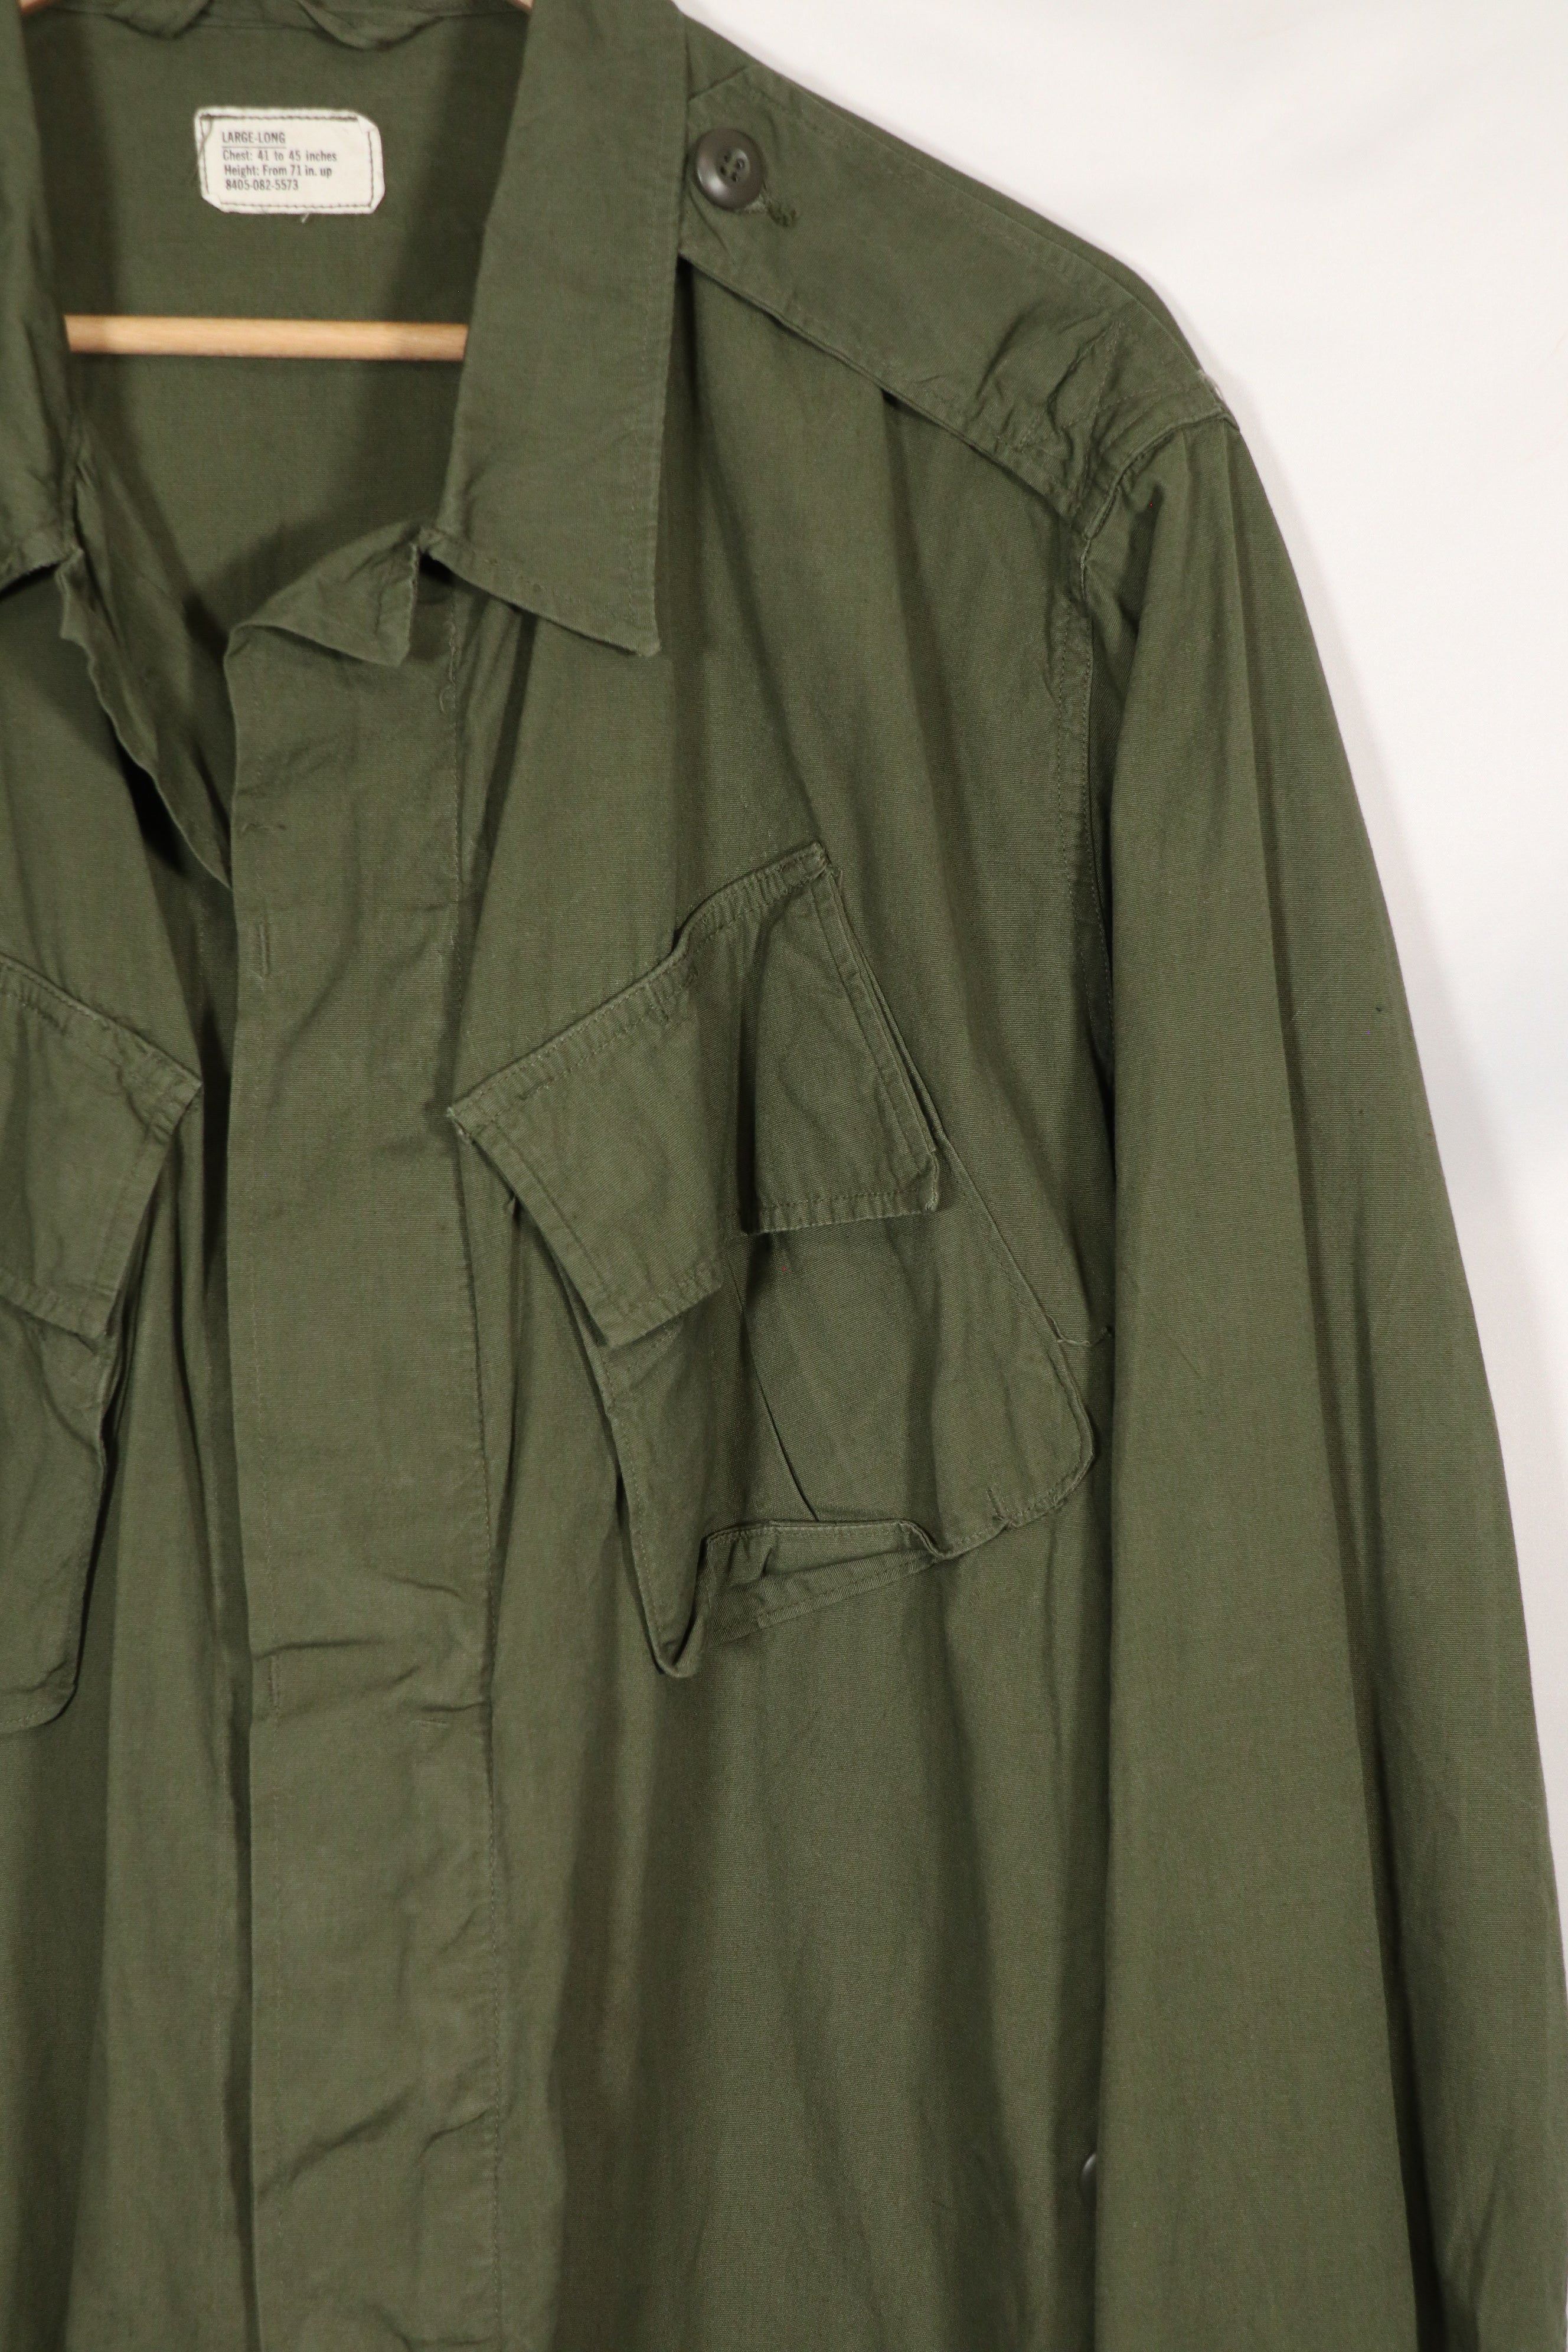 Real 2nd Model Jungle Fatigue Jacket in good condition, L-L, almost unused.